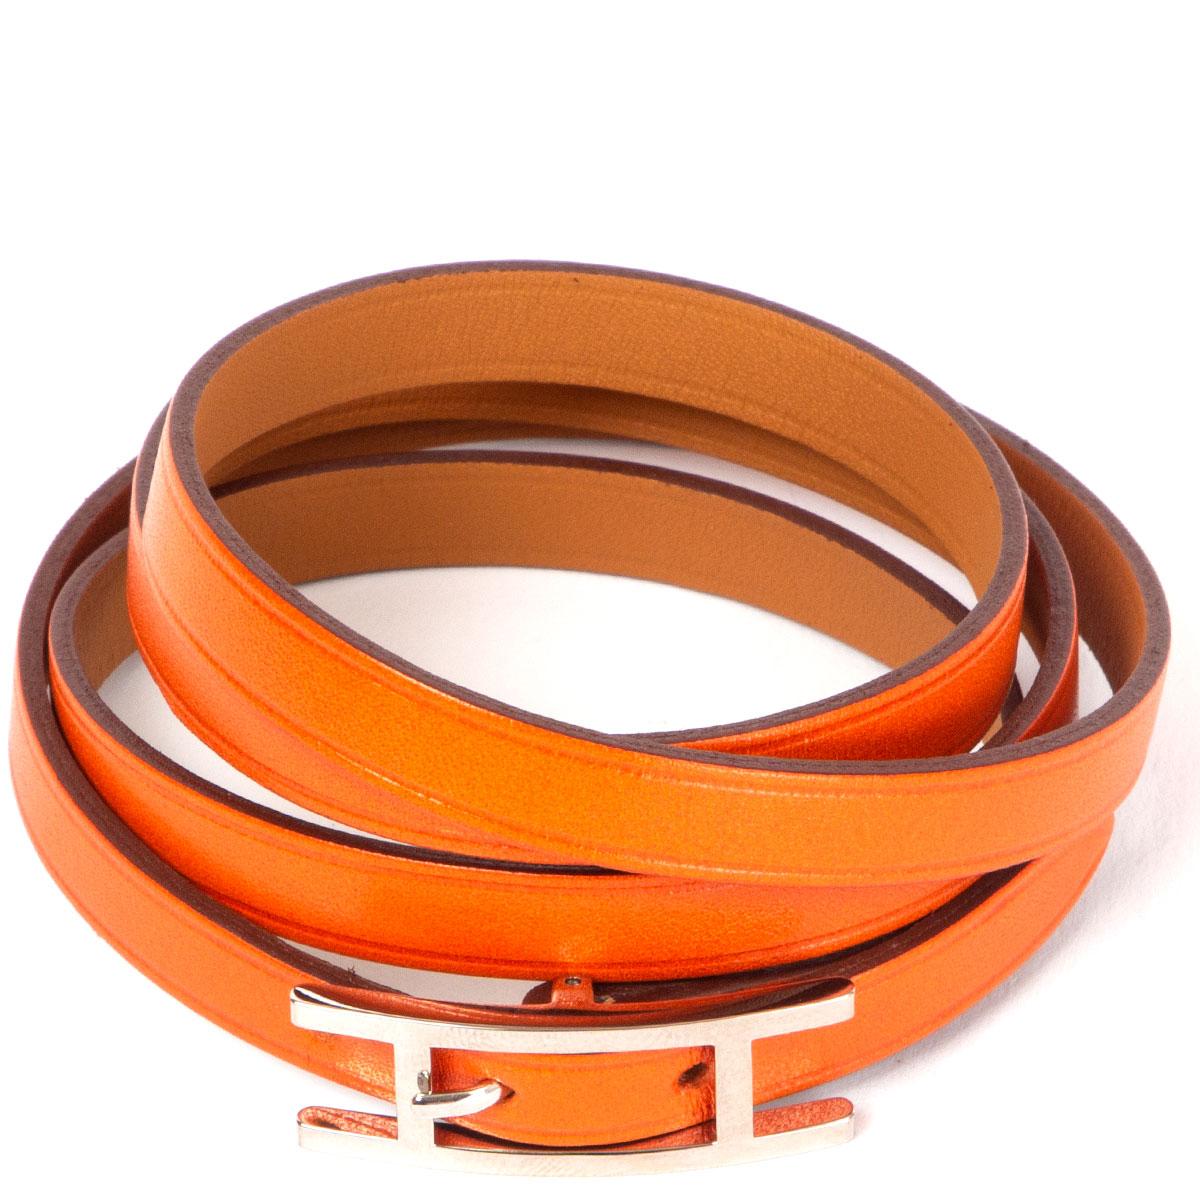 100% authentic Hermes 'Hapi 4' bracelet orange Swift with Palladium hardware. Has been worn and is in excellent condition. Comes with dust bag. 

Measurements
Width	0.7cm (0.3in)
Length	75cm (29.3in)
Fits	68cm (26.5in) to 70cm